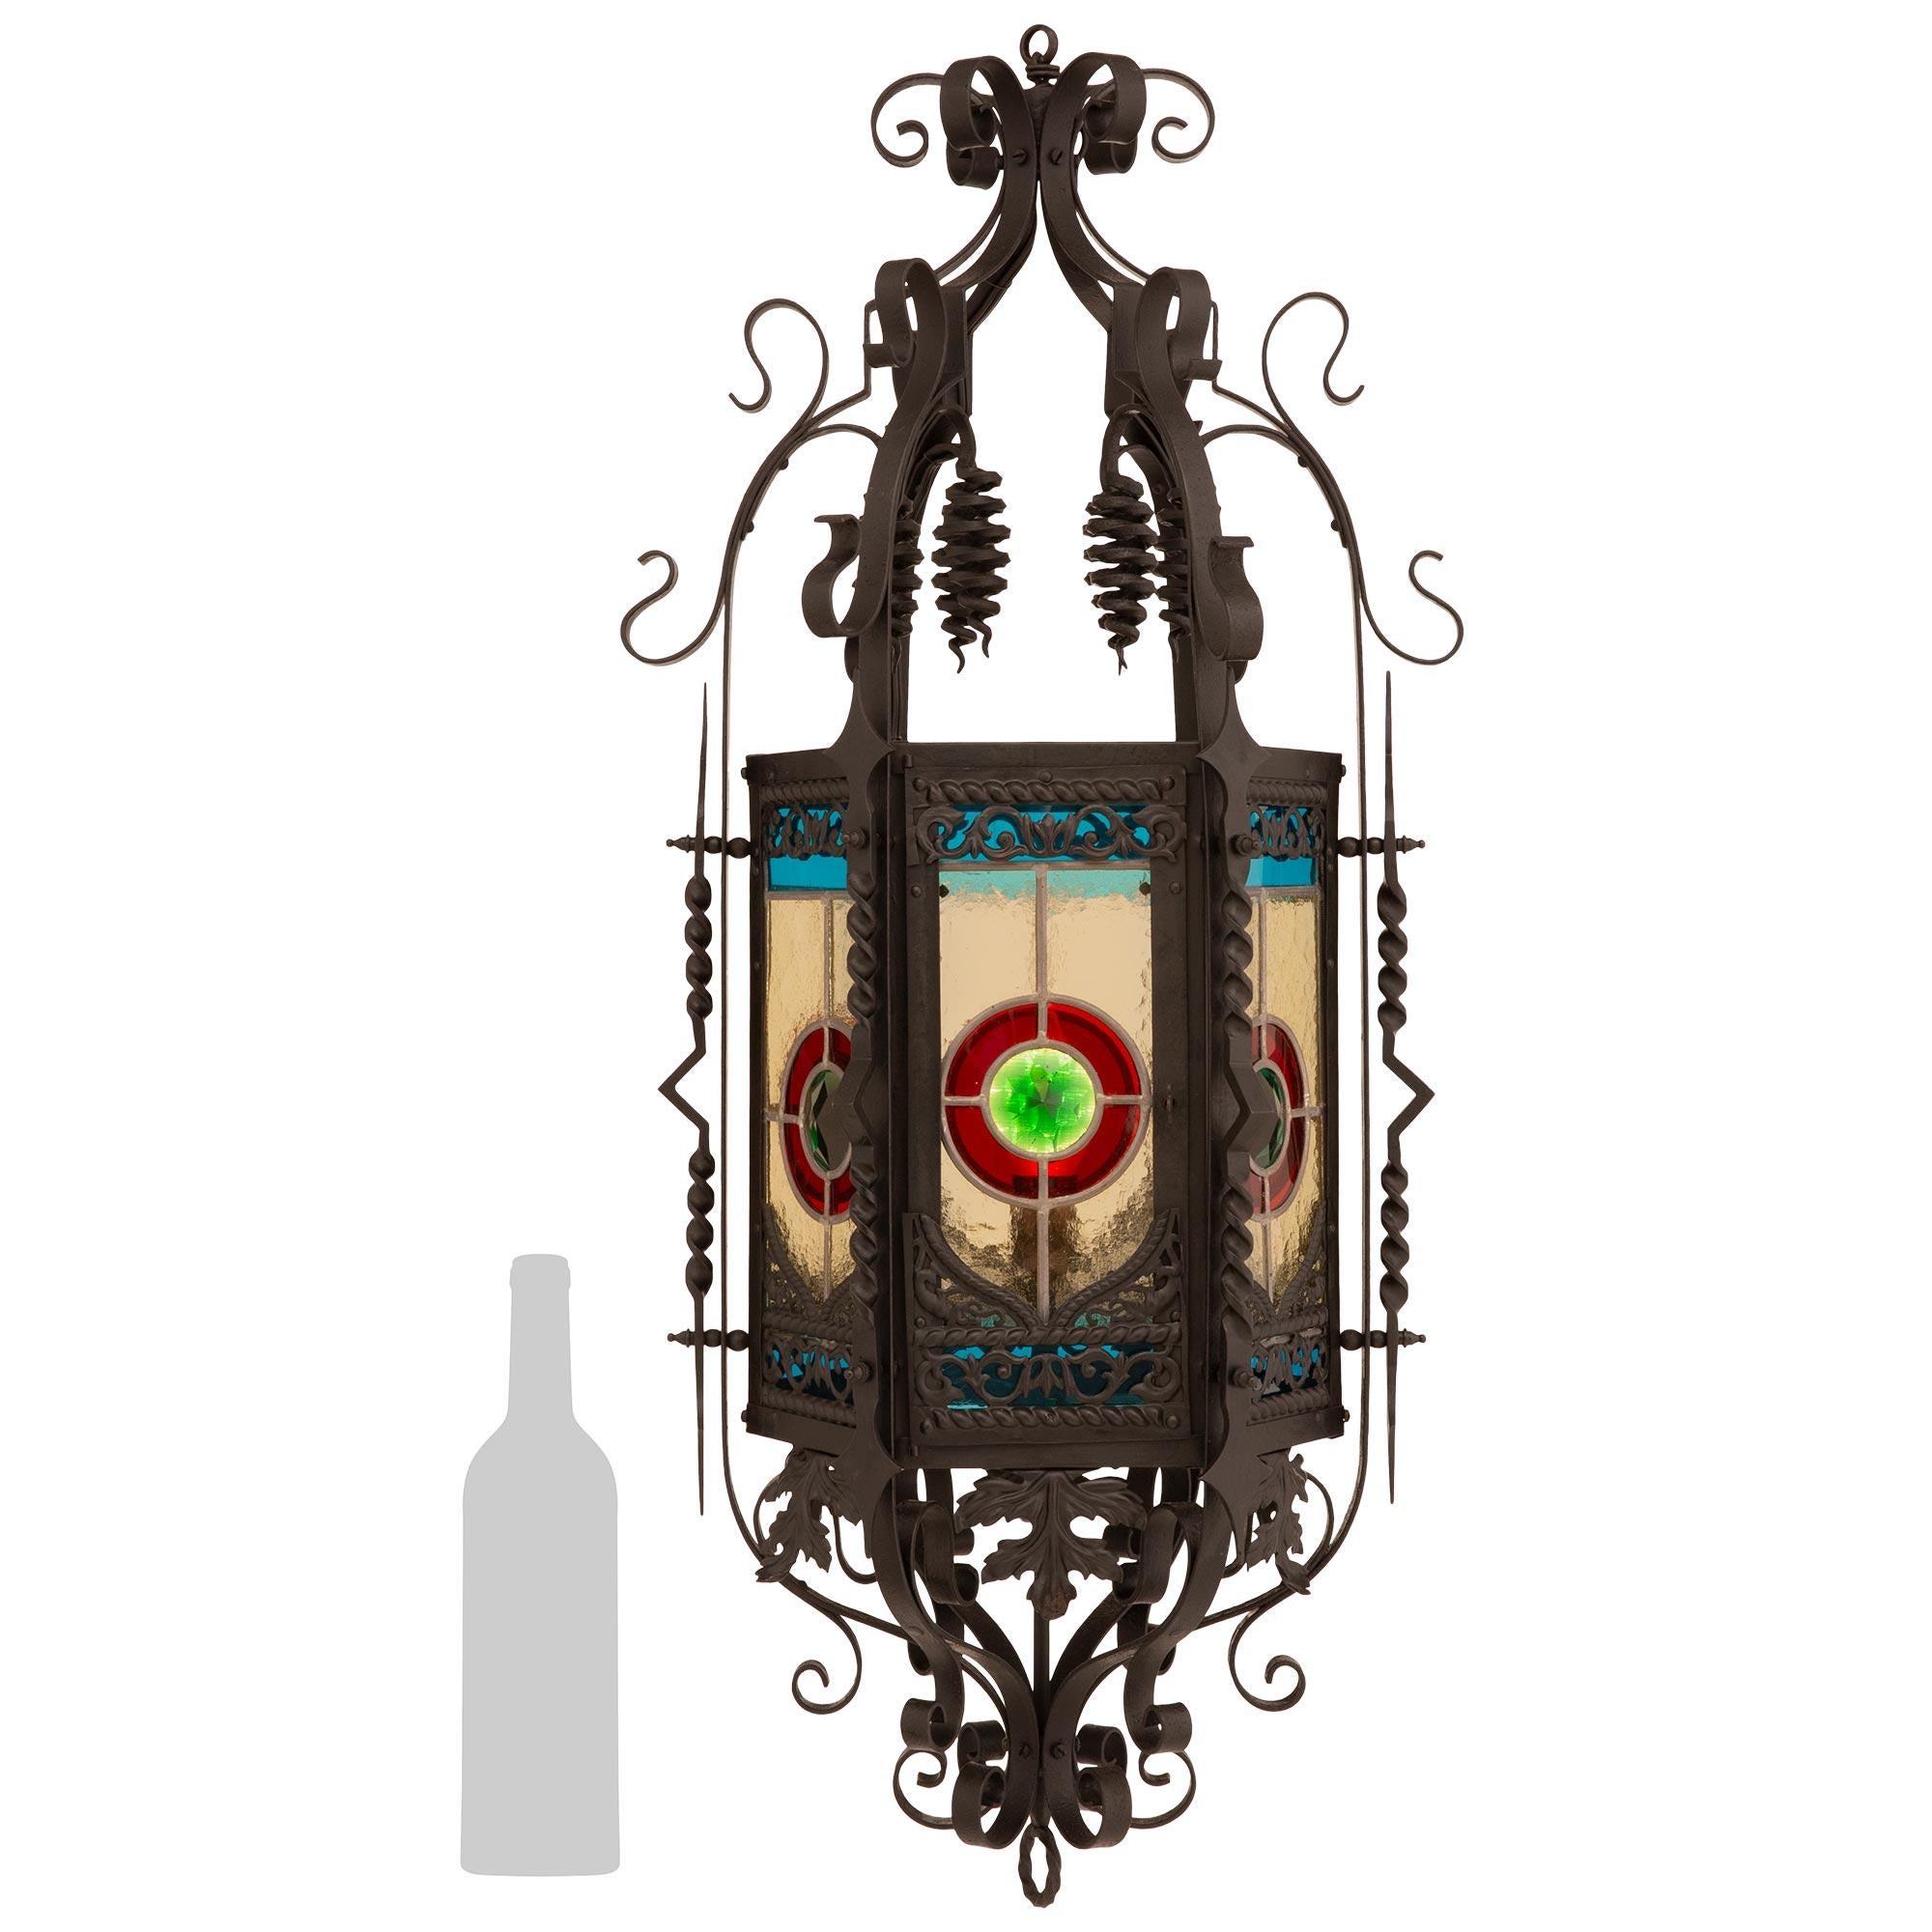 A high quality and most decorative French 19th century Renaissance st. Wrought Iron and Stained Glass lantern. This beautiful six window lantern is centered around the bottom finial of a spiraling Wrought Iron ring. Above the finial is an array of